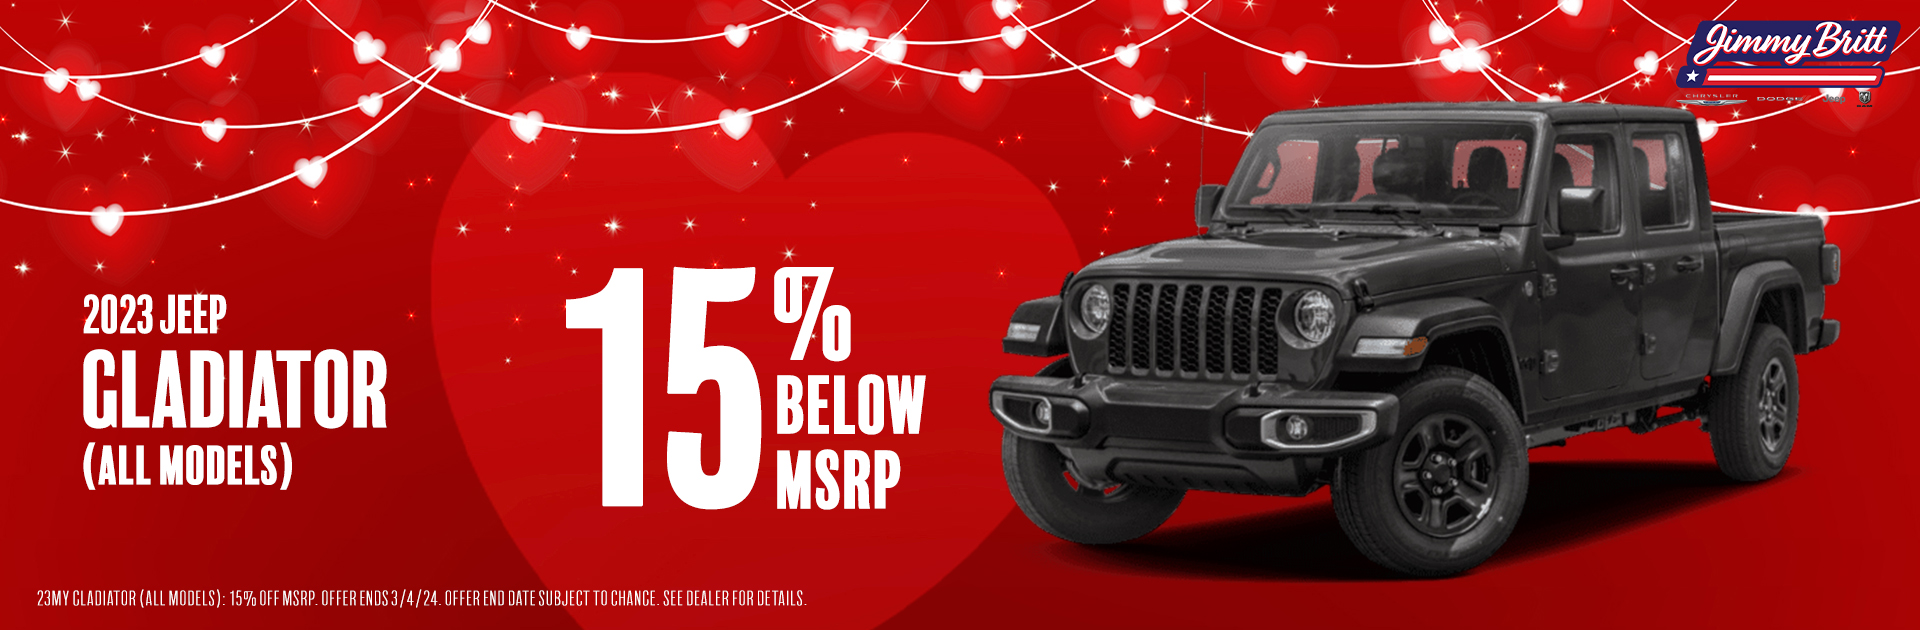 2023 Jeep Gladiator: Up to 15% below MSRP!